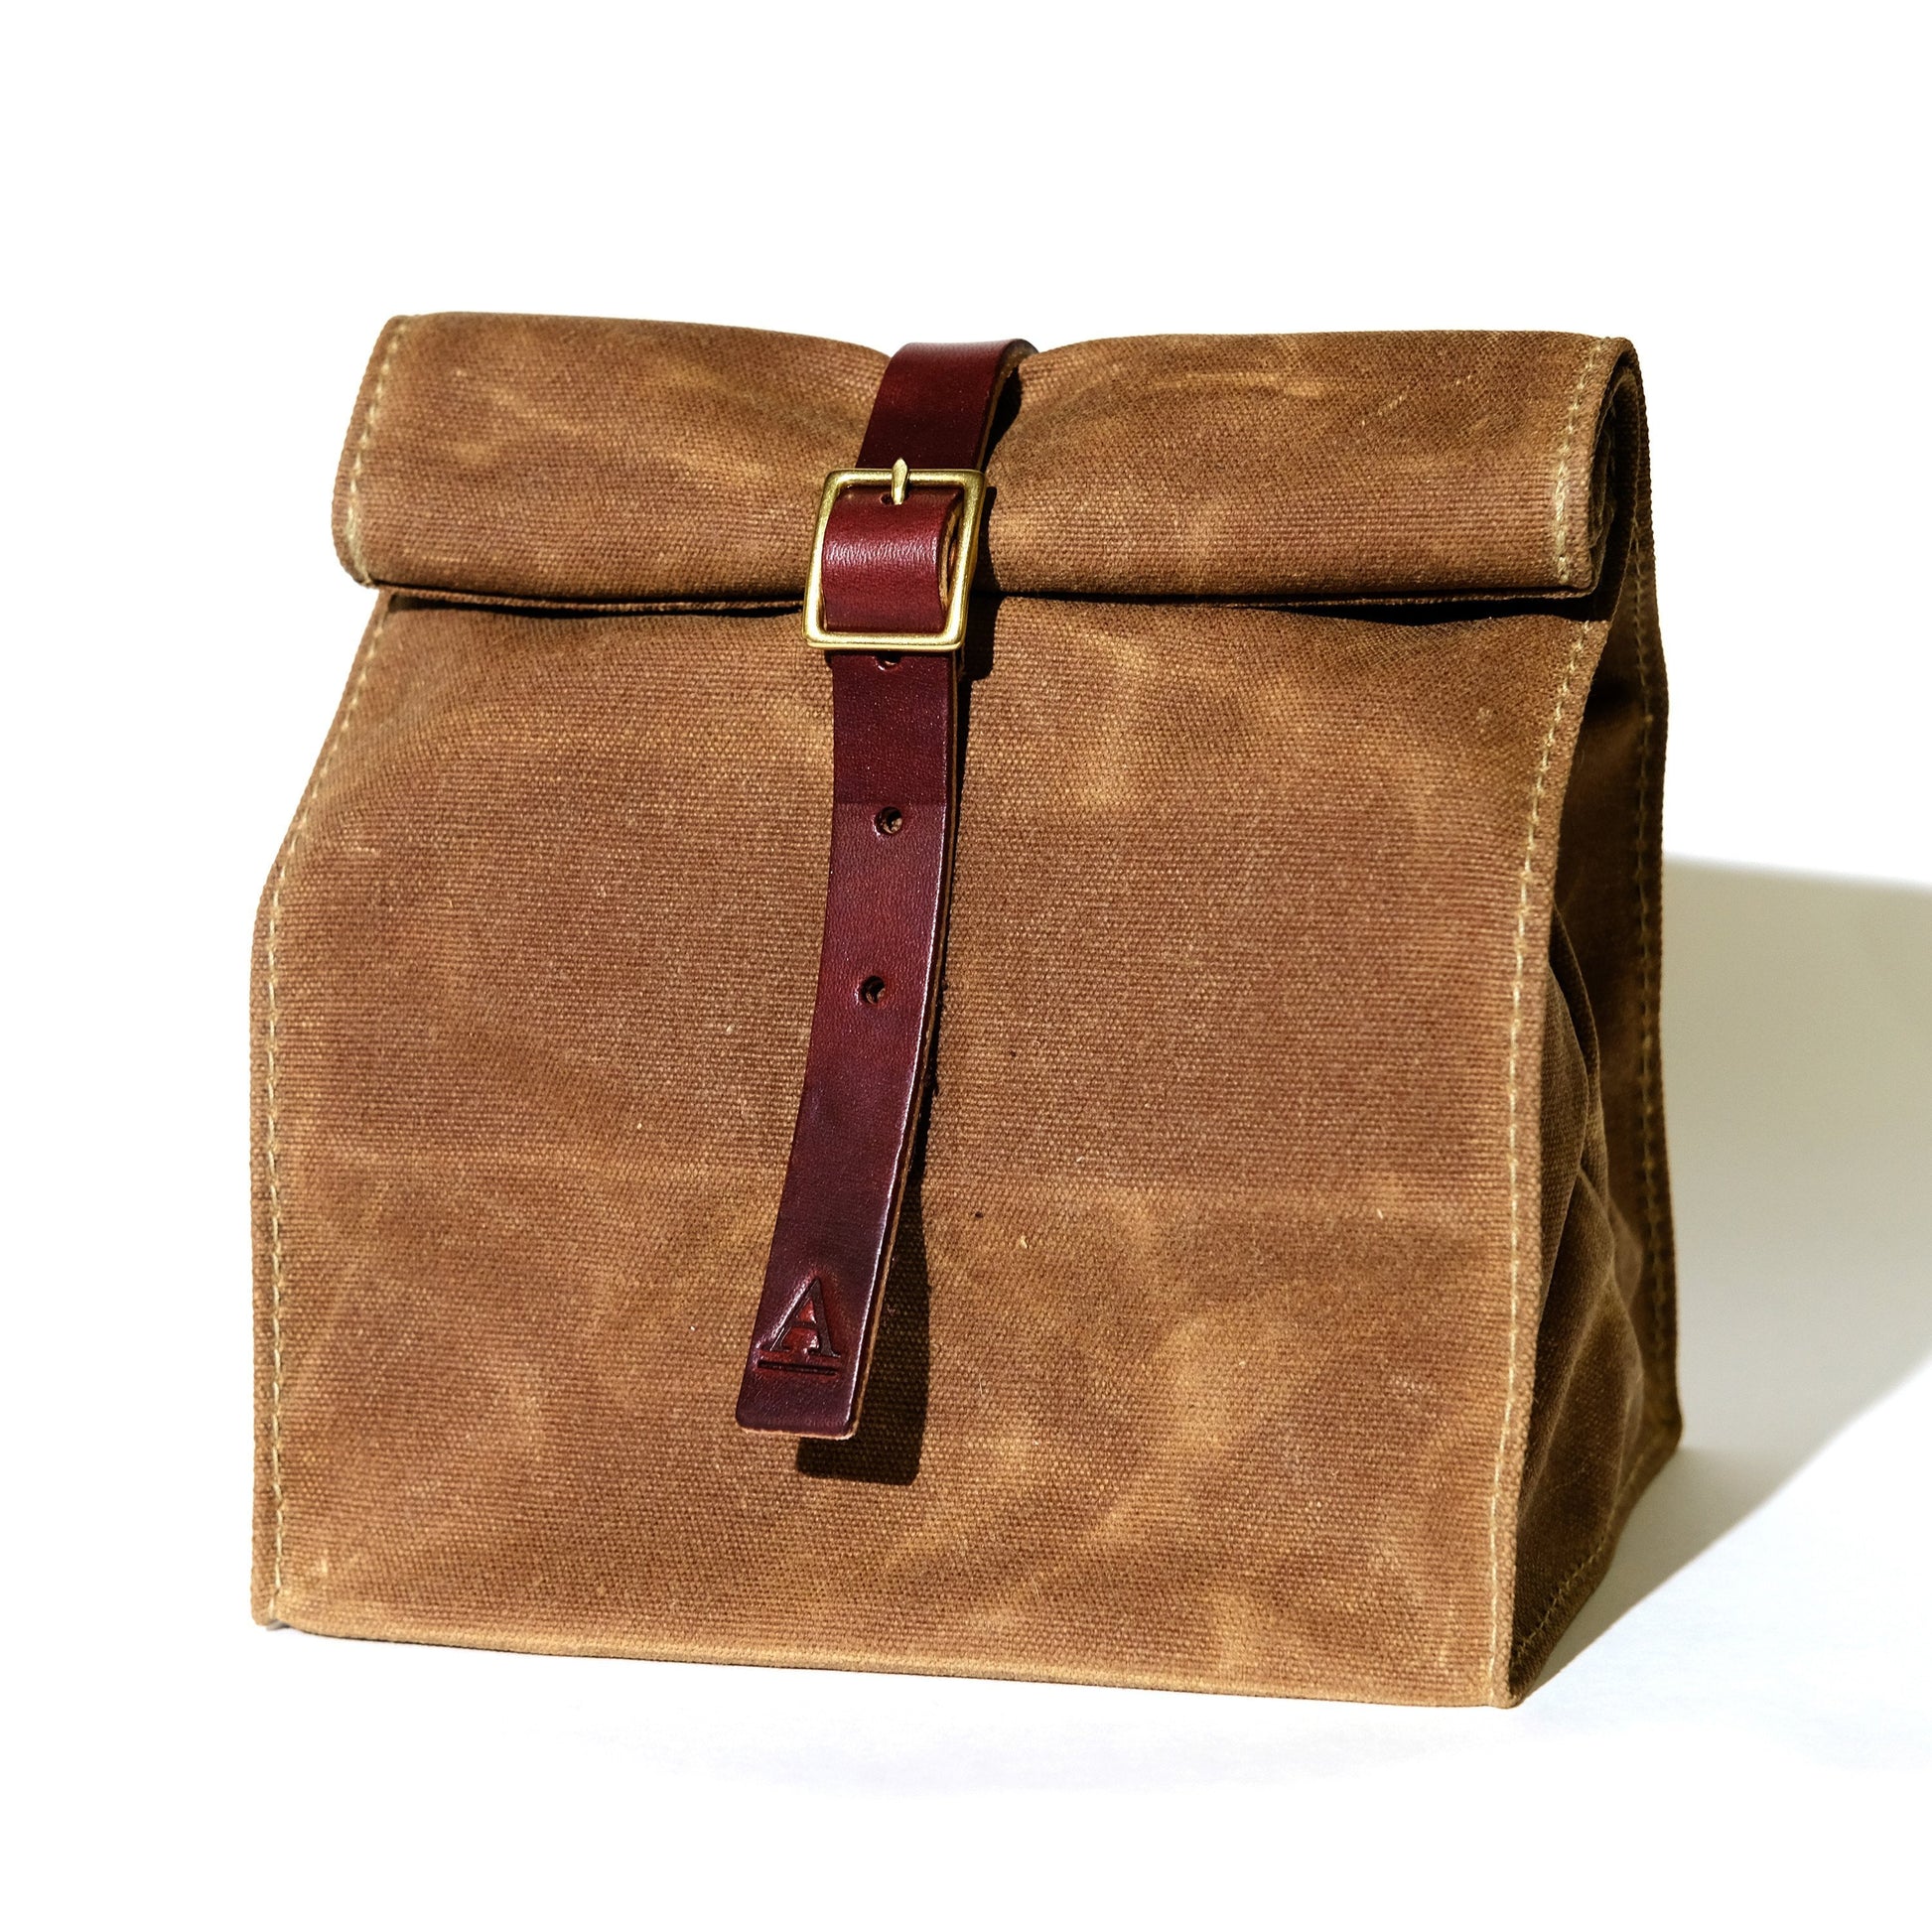 Waxed canvas Lunch Tote: Rust Cordovan - LAB Collector Hong Kong